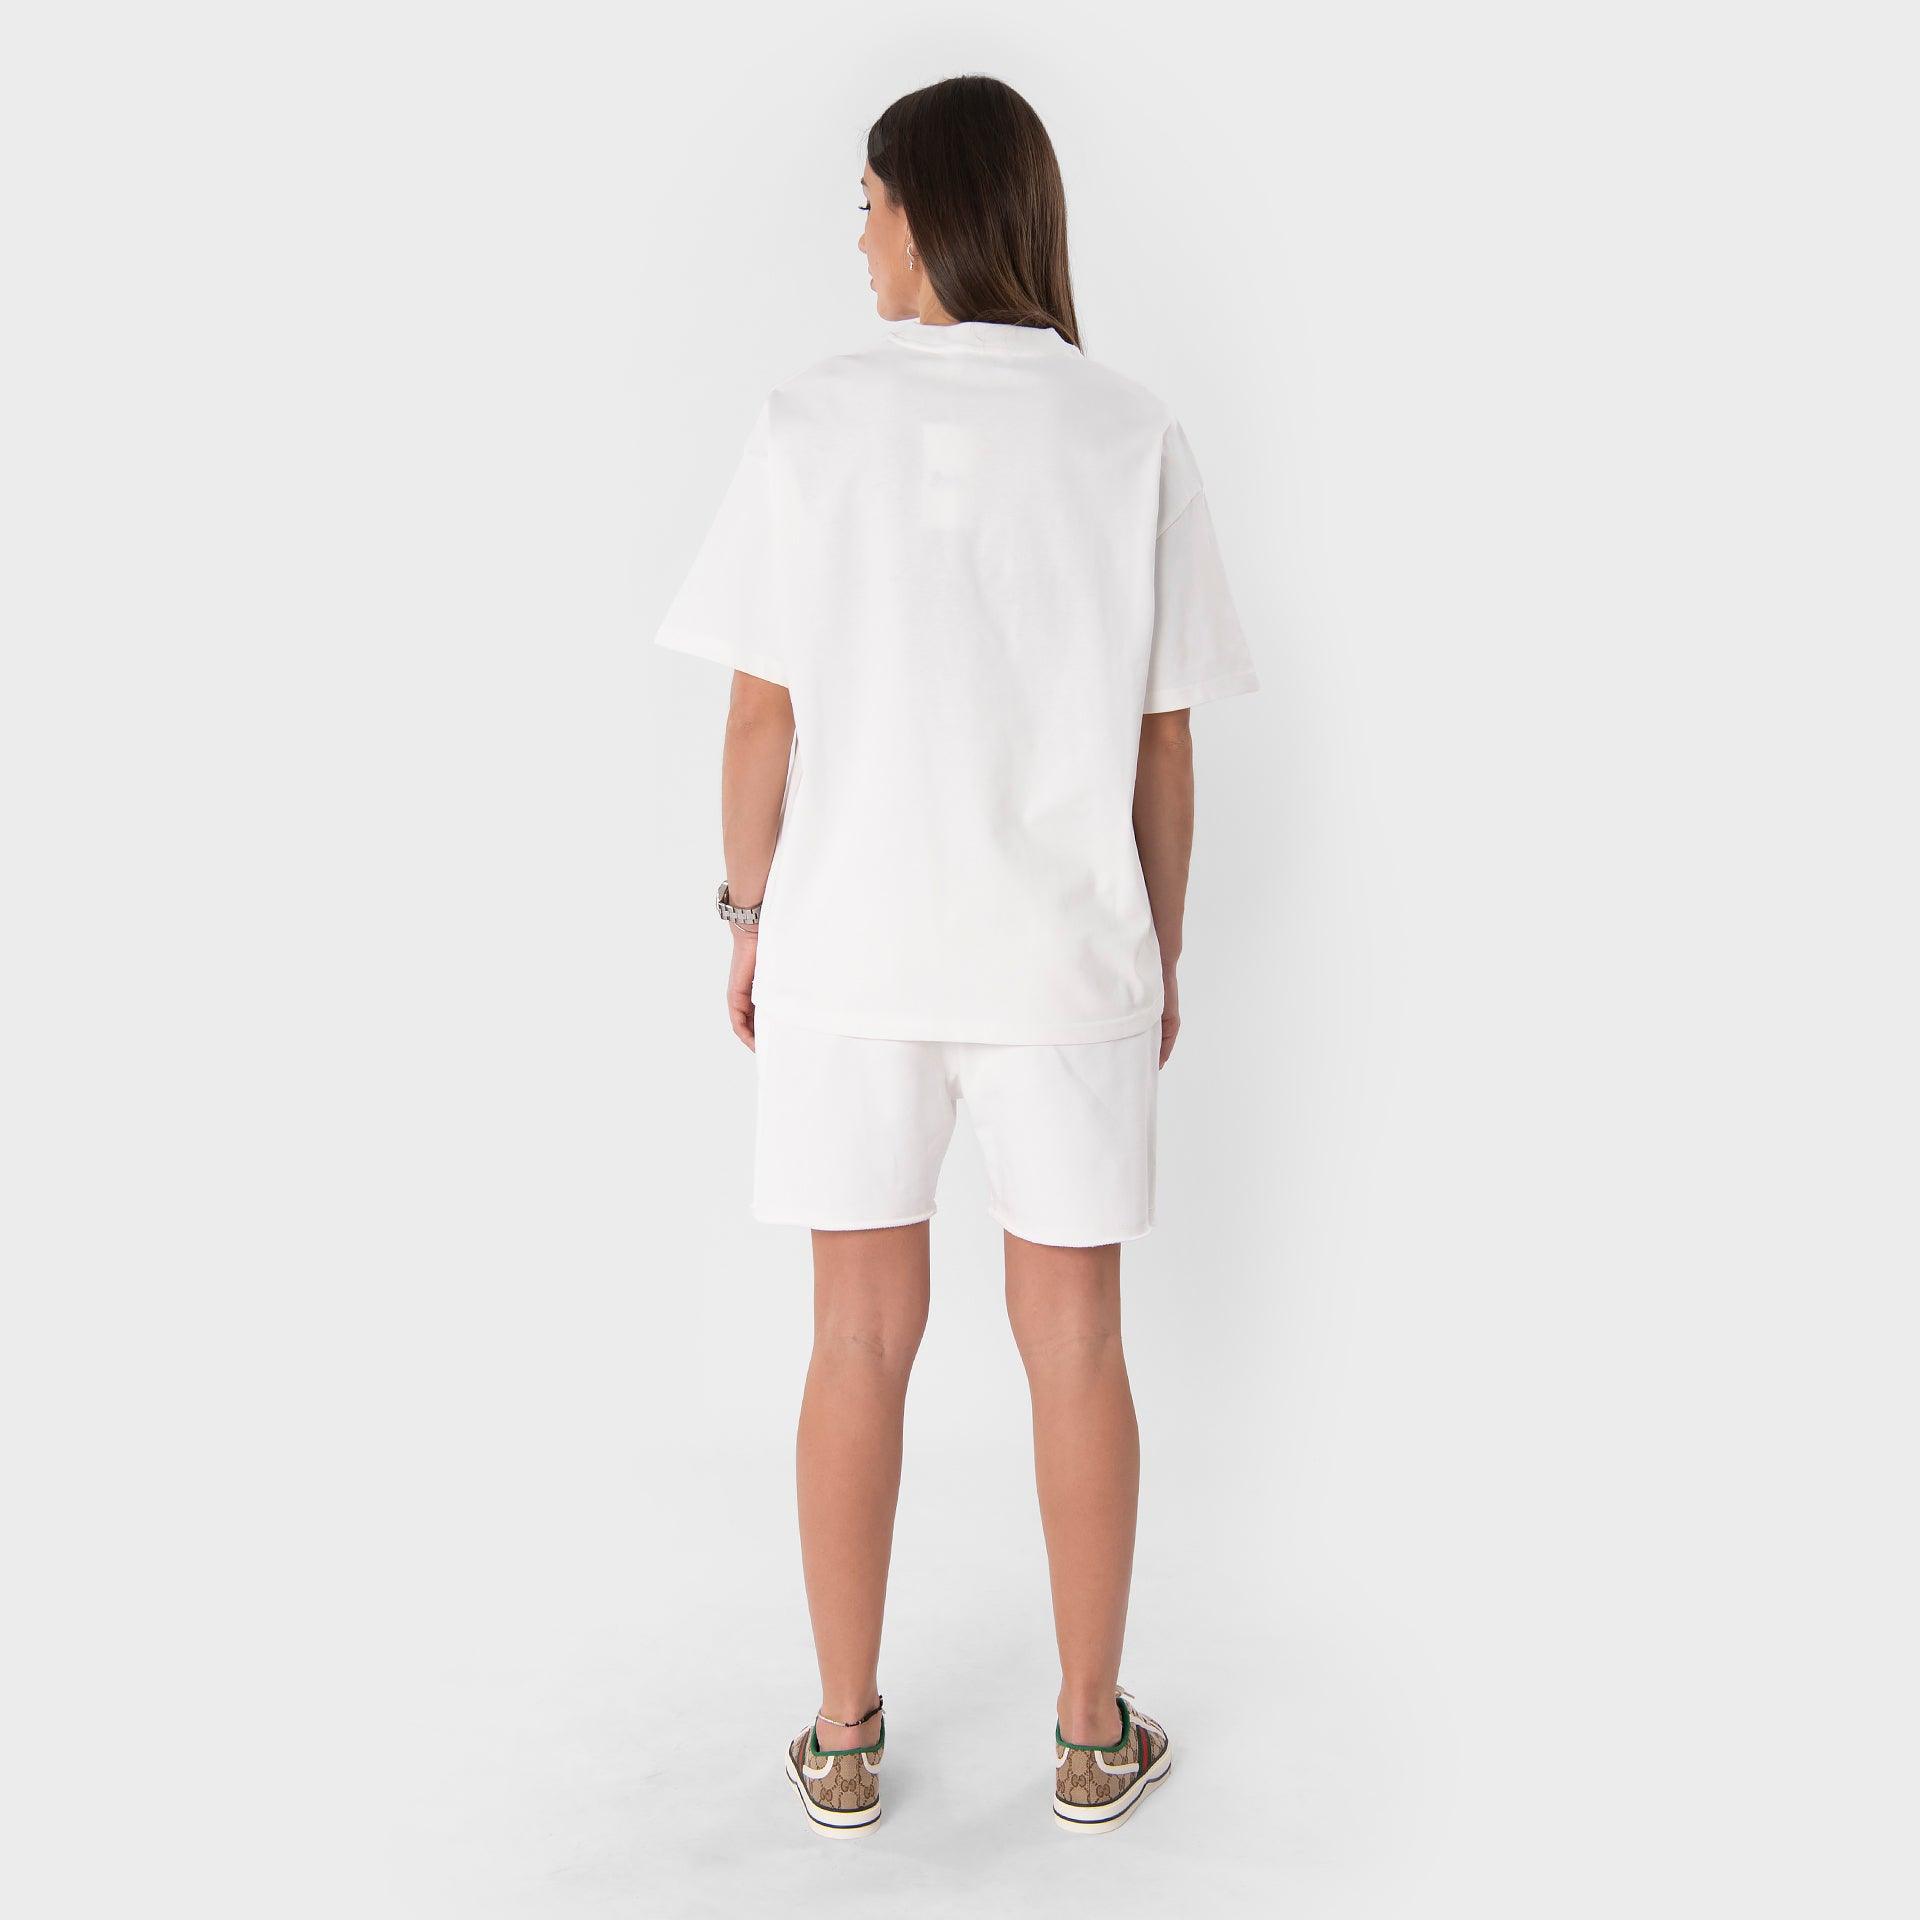 White Parachute T-shirt From Tribe - WECRE8